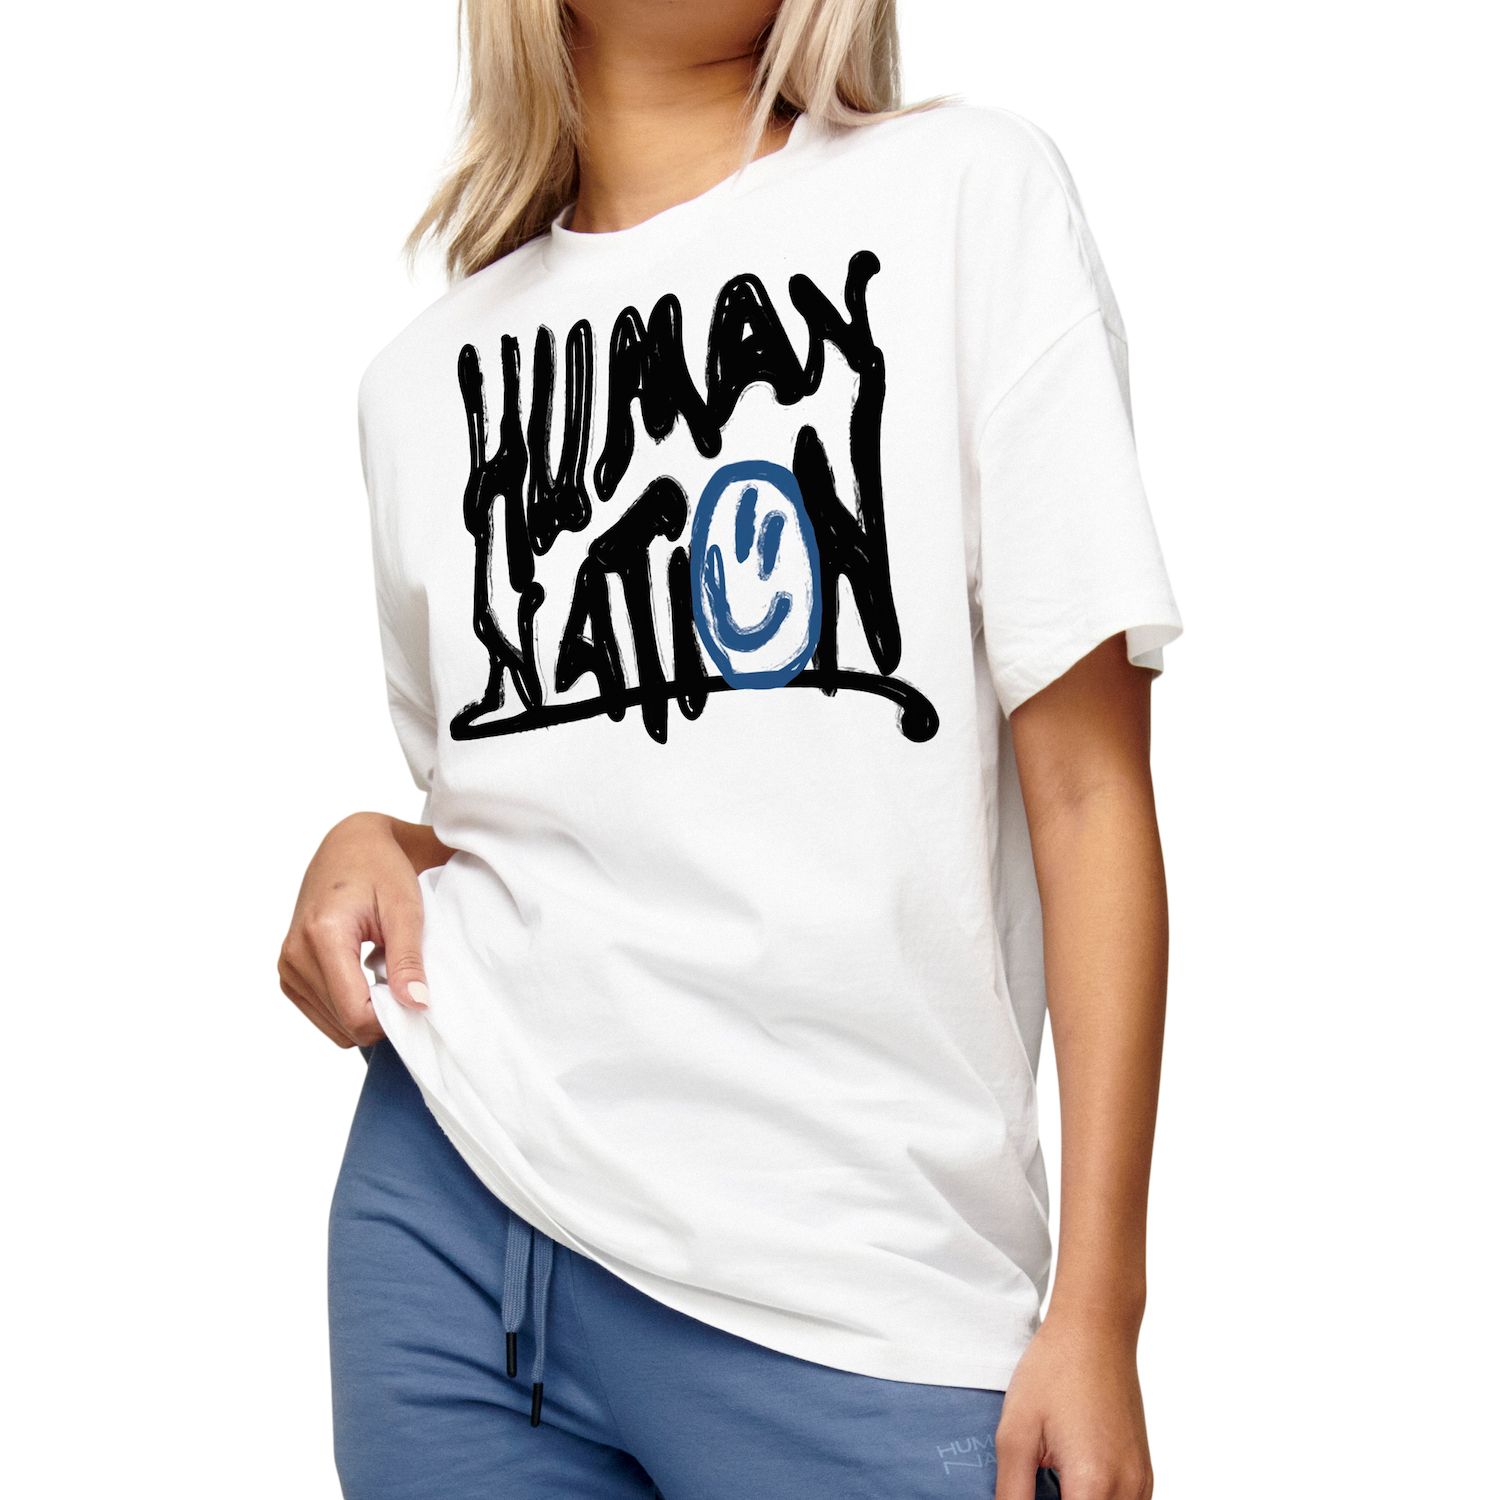 Image for Human Nation Organic Cotton Together Tee at Kohl's.